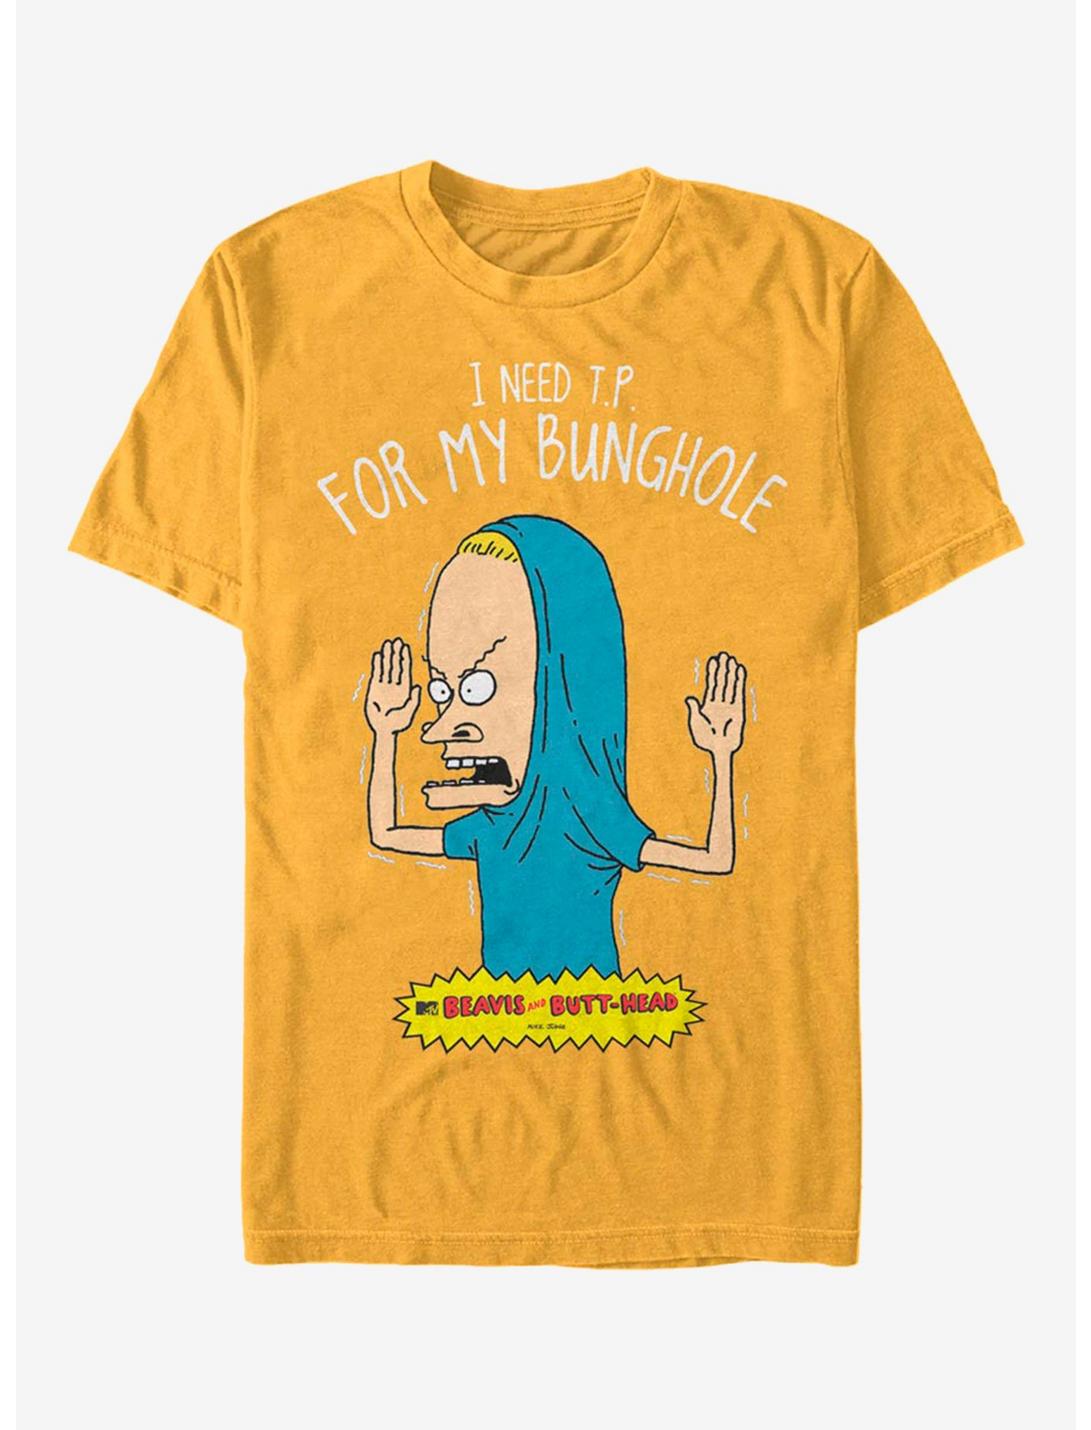 Beavis and Butt-Head Cornholio T.P. For My Bunghole T-Shirt, GOLD, hi-res